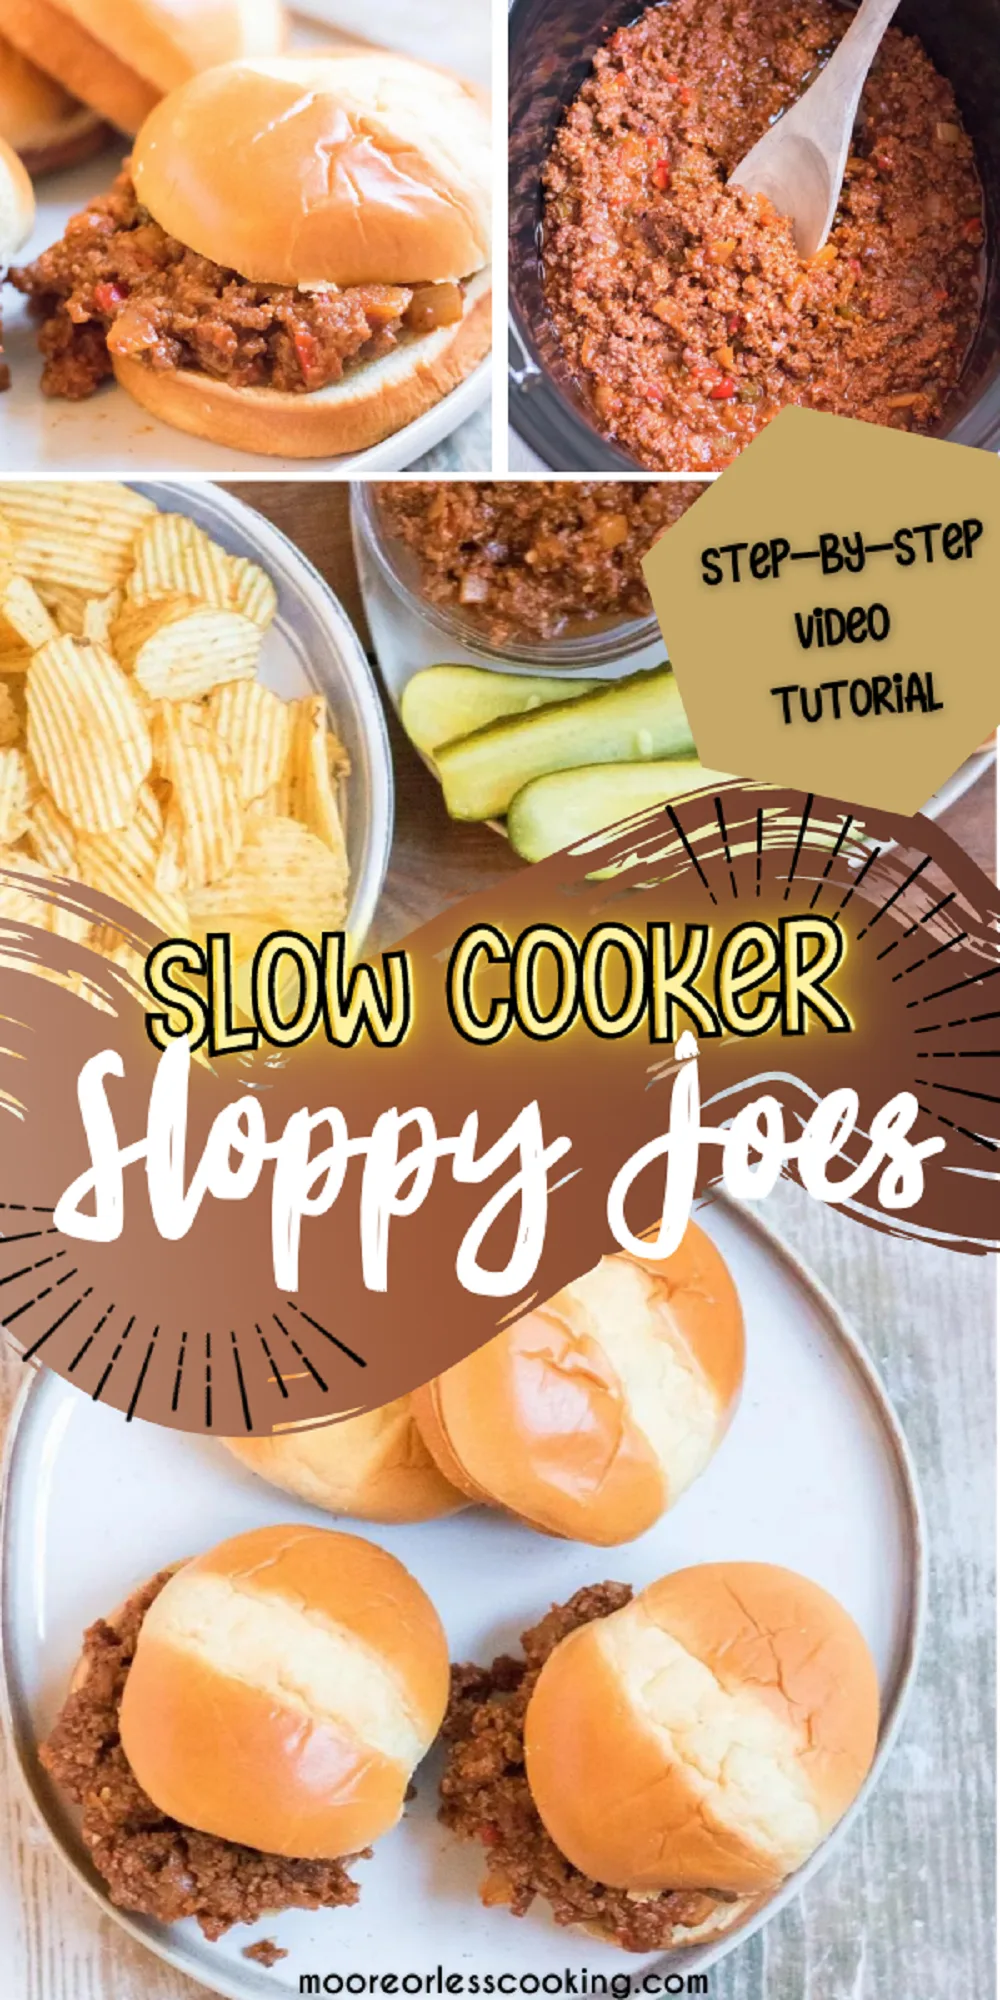 Loaded with flavor and made with simple pantry ingredients, this easy Slow Cooker Sloppy Joes recipe is always a tasty homemade favorite for mealtime, game nights, or potlucks. via @Mooreorlesscook